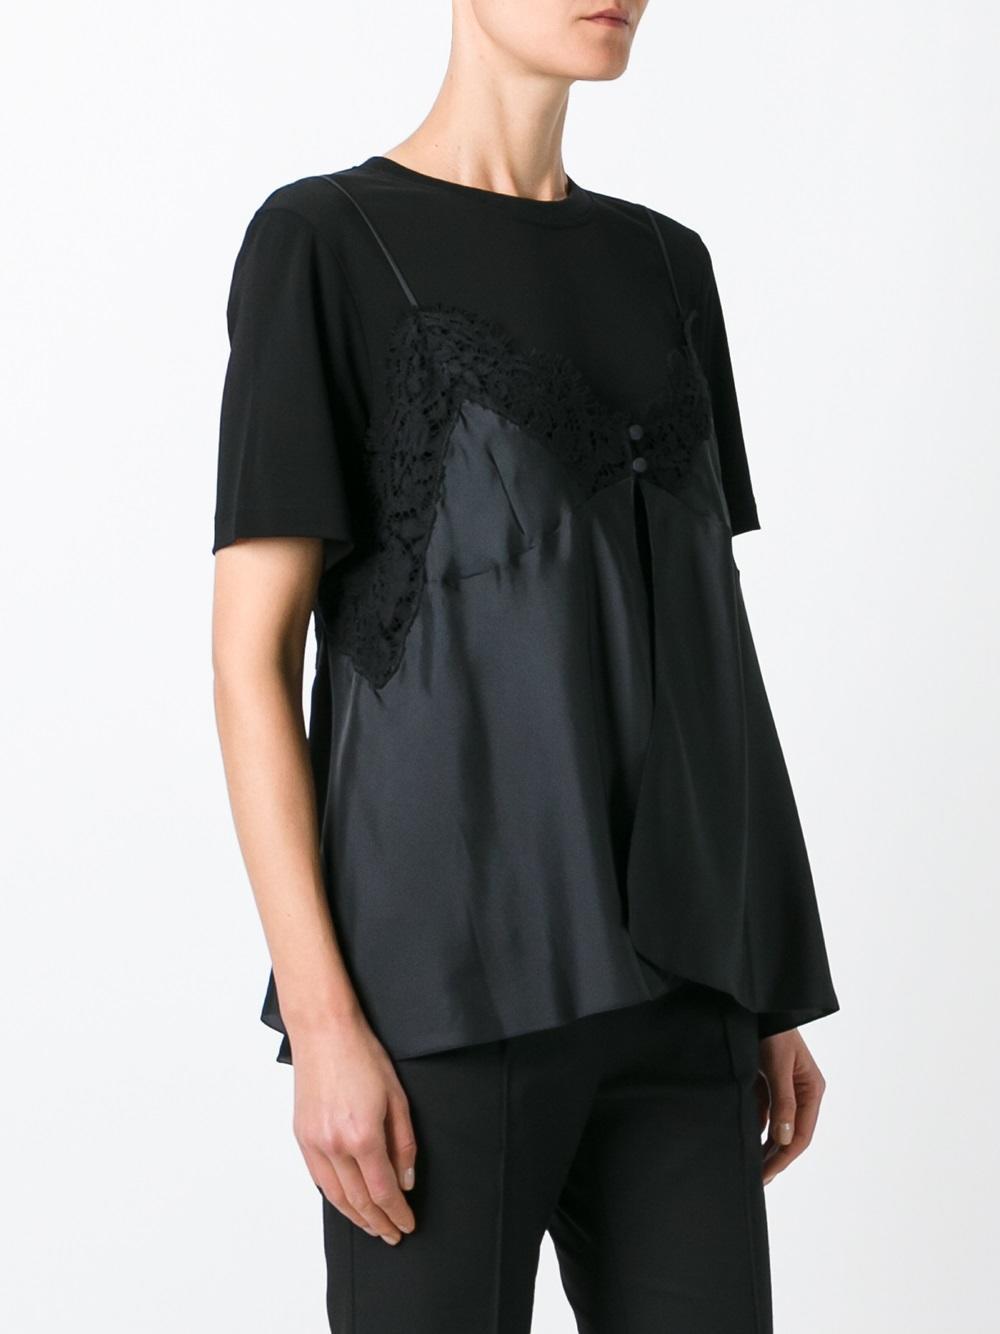 Maison Margiela Lace Cami Layered T-shirt in Black - Lyst